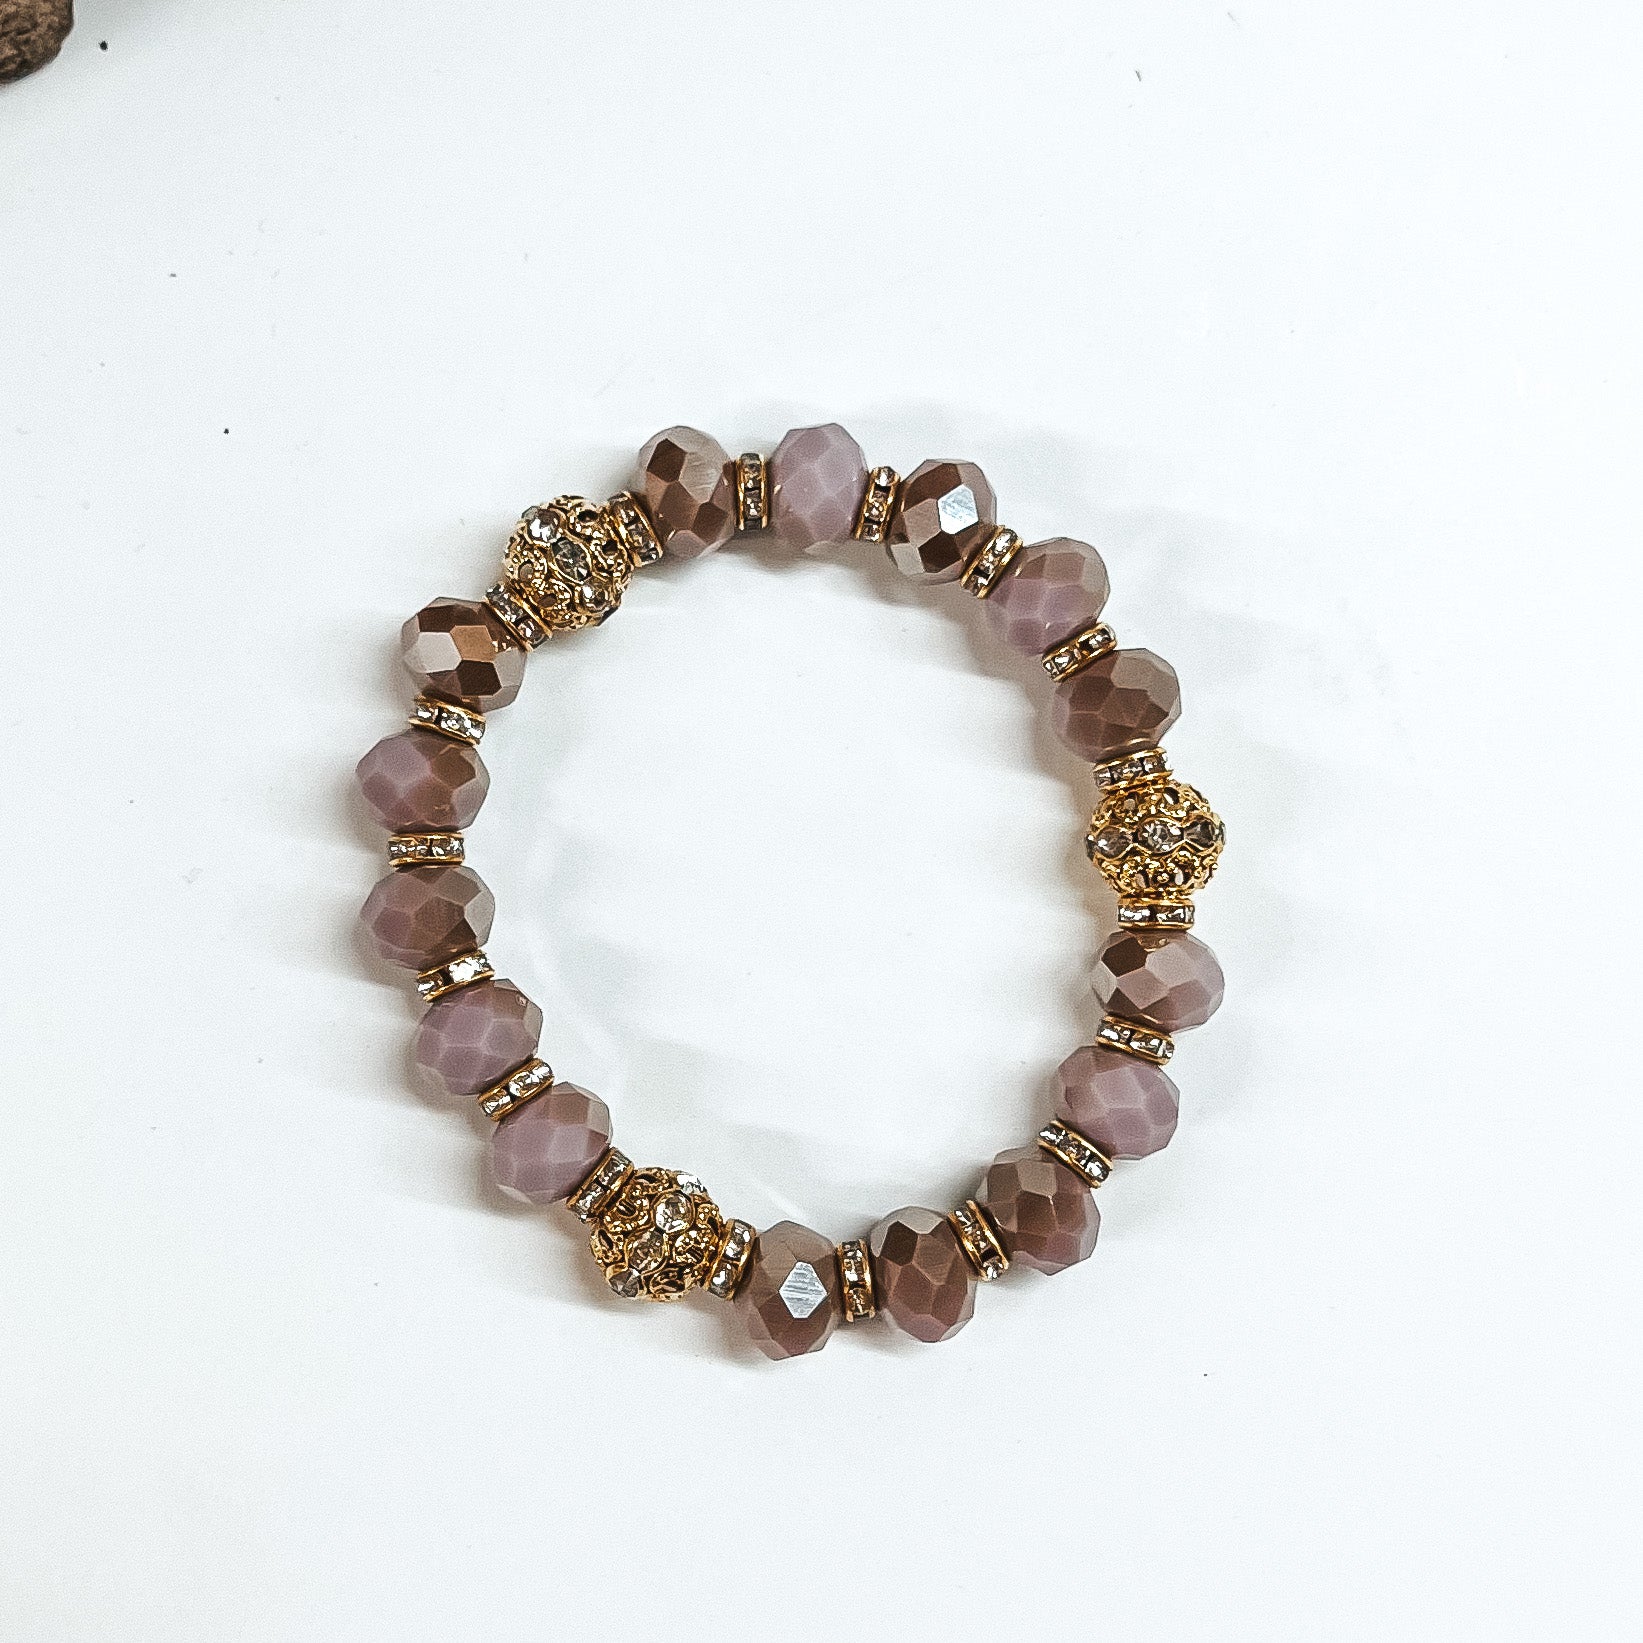 This is lilac/mauve mix crystal beaded bracelets with gold spacers.  The gold spacers have clear crystals in them and there are three gold and  crystals beads.This bracelet is taken on white background.